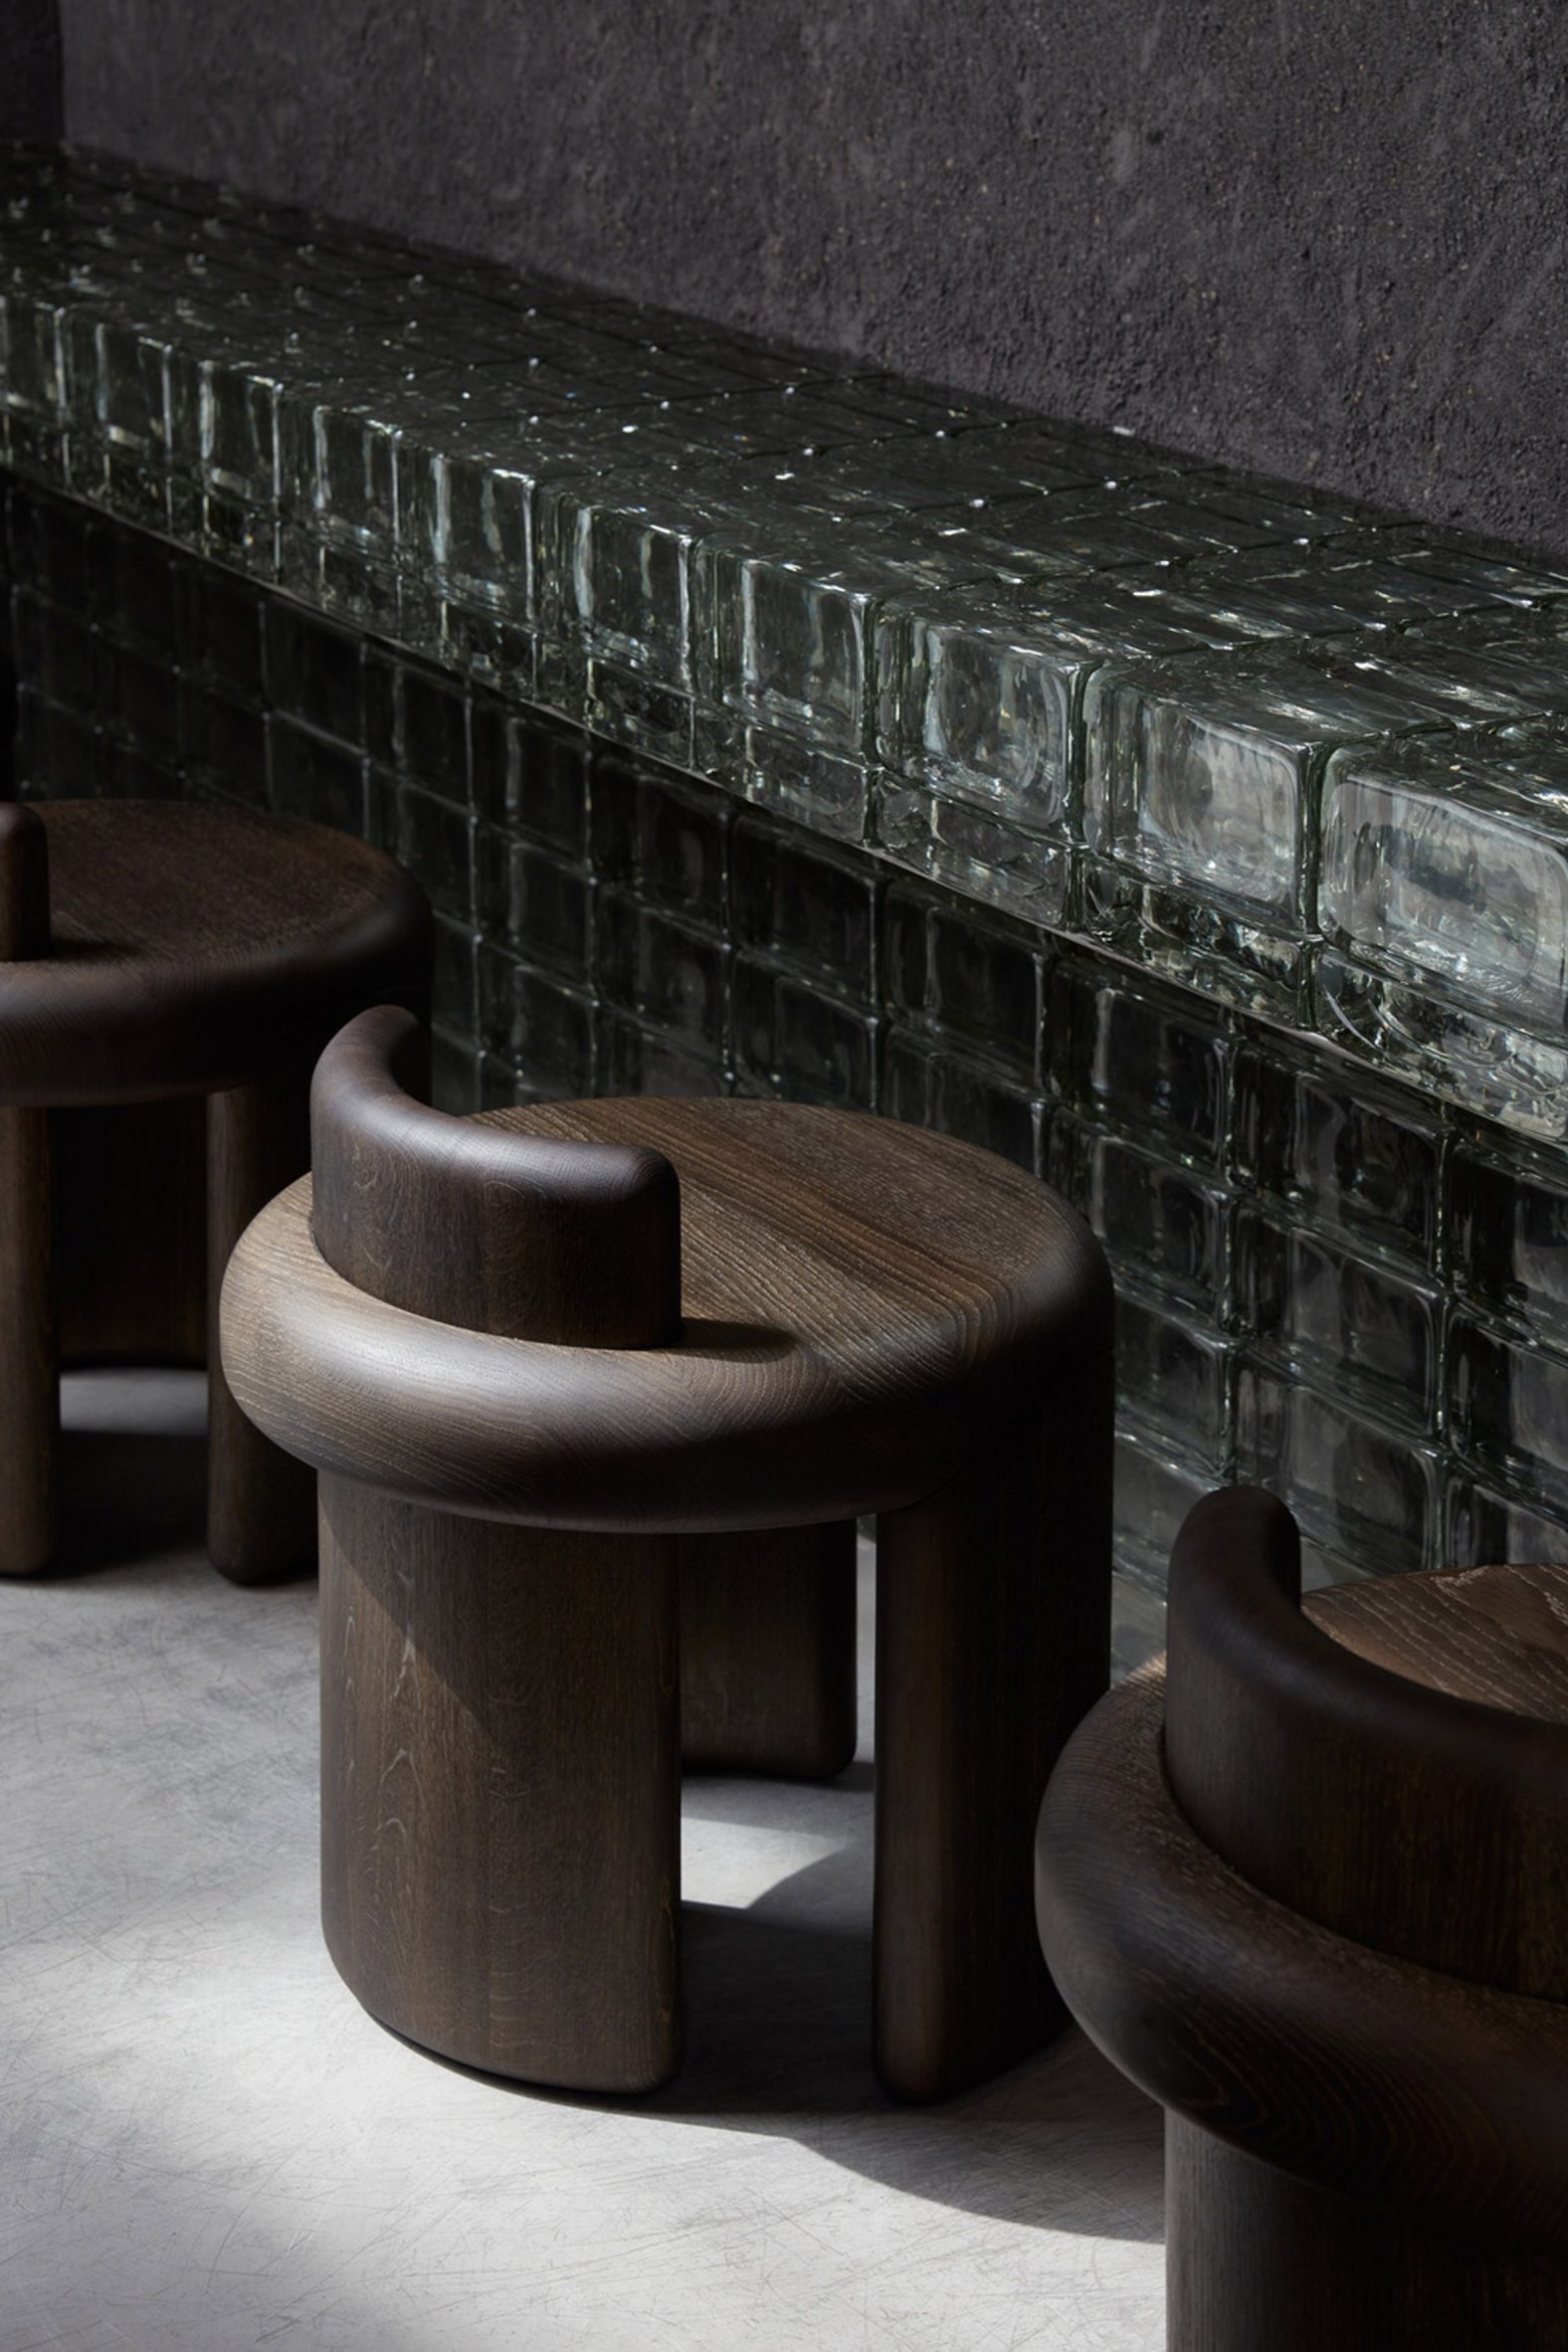 Glass-brick counter fronted by low wooden stools